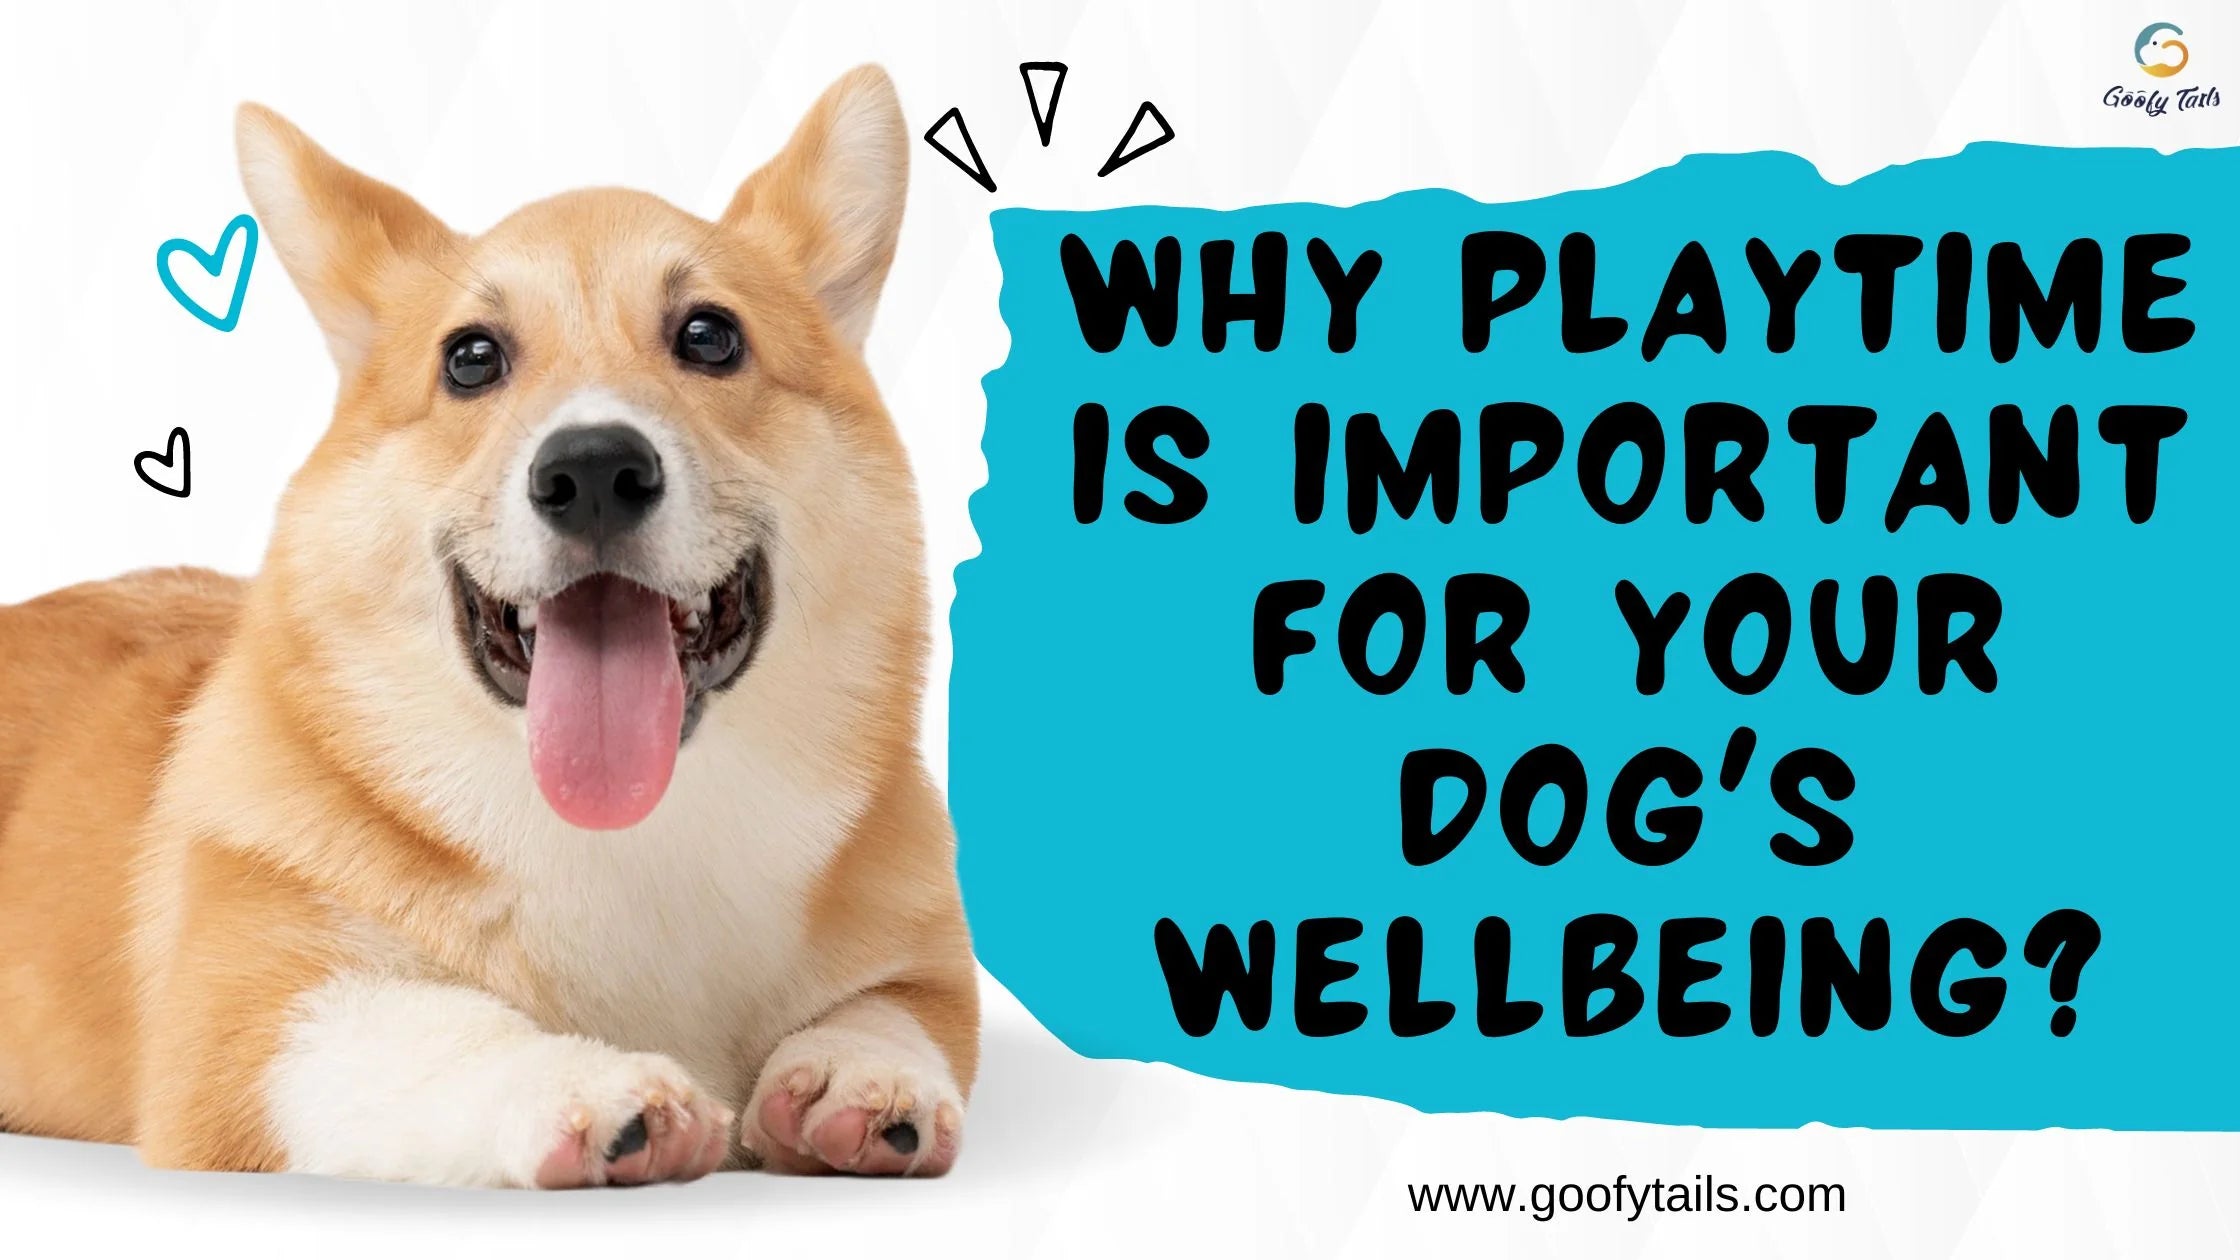 Why Playtime is Important for Your Dog's Wellbeing